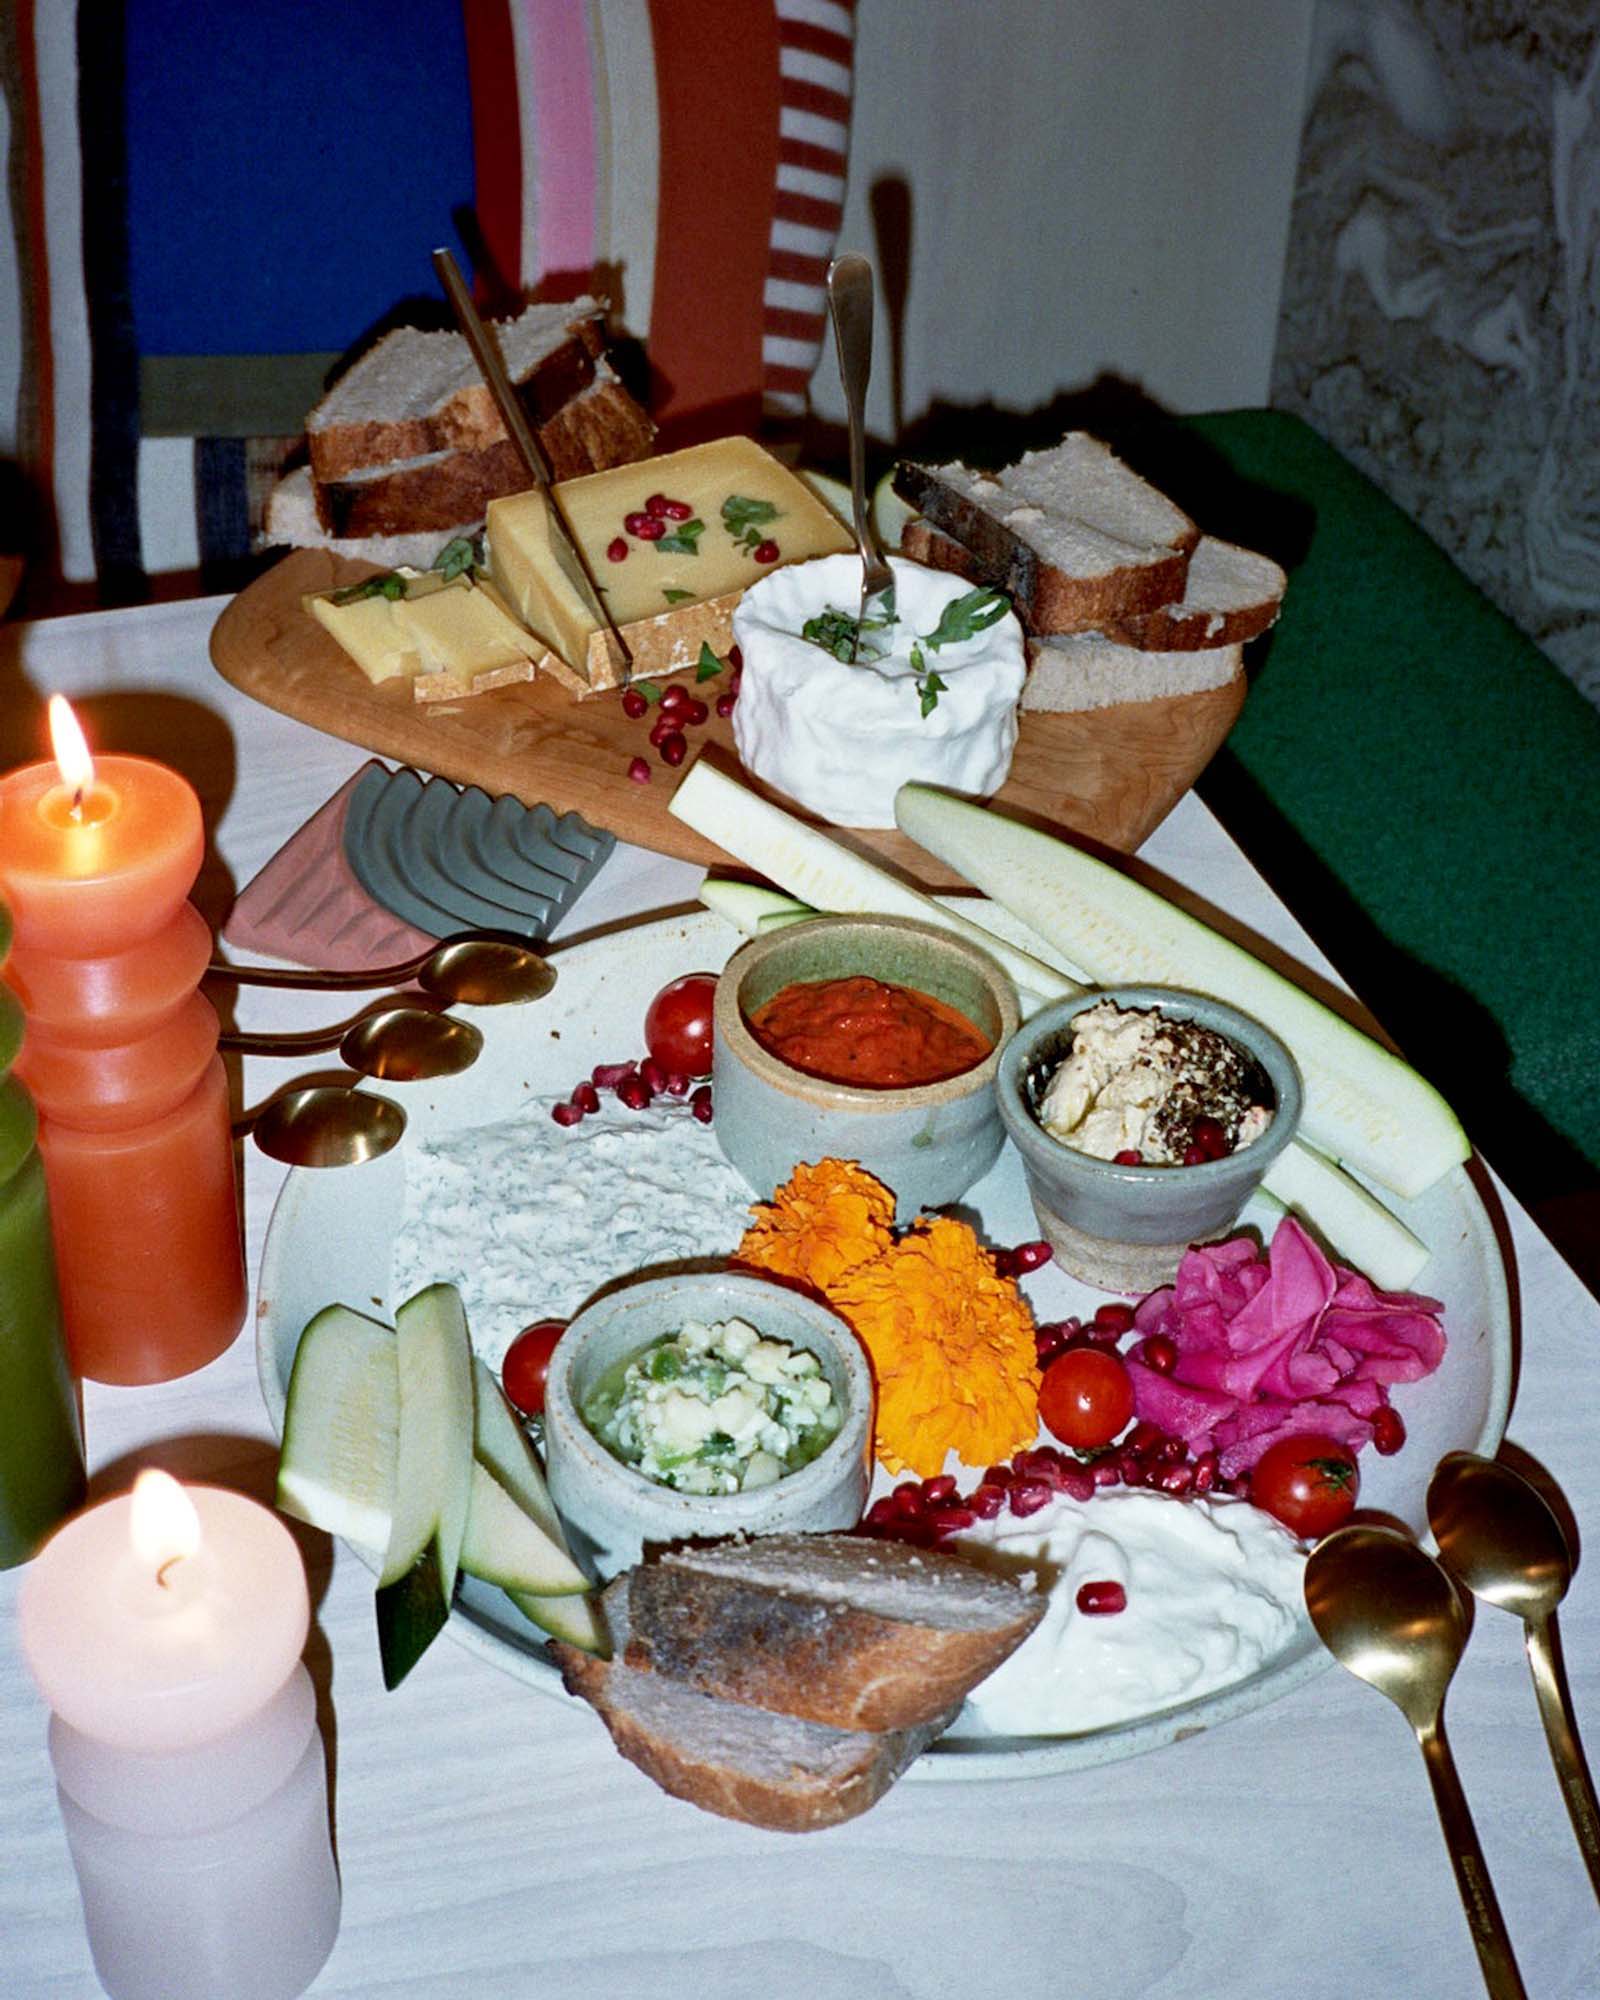 A close up image of the dinner table, with chessboard, a plate of various dips, and areaware candles.